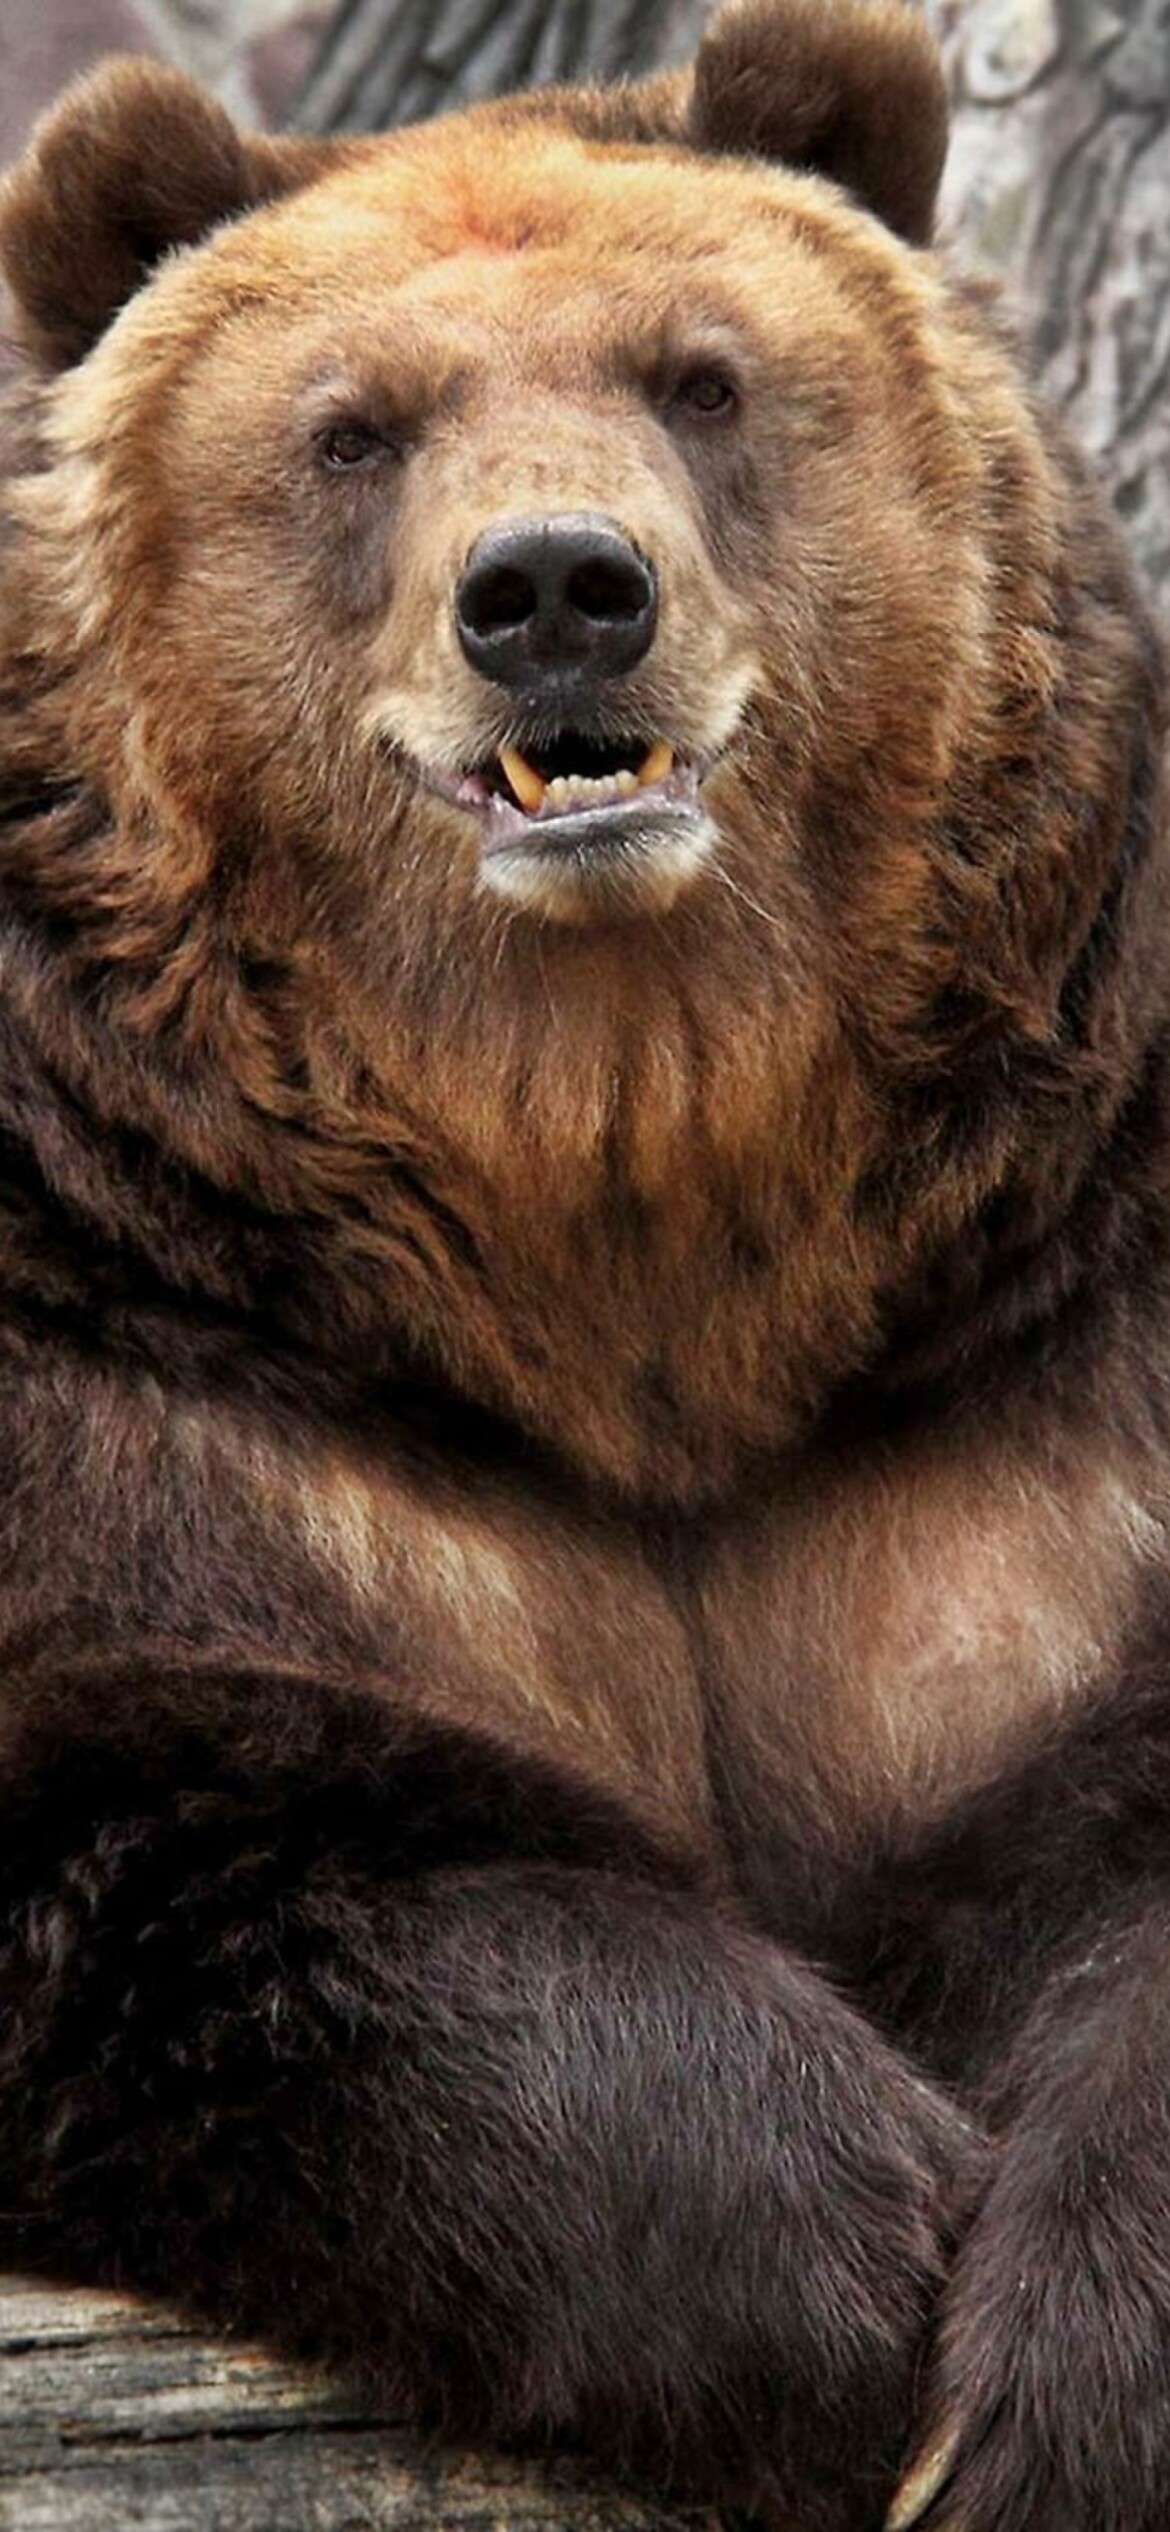 Bear: Grizzly, Distinguished by its large size and a distinctive hump between the shoulders. 1170x2540 HD Background.